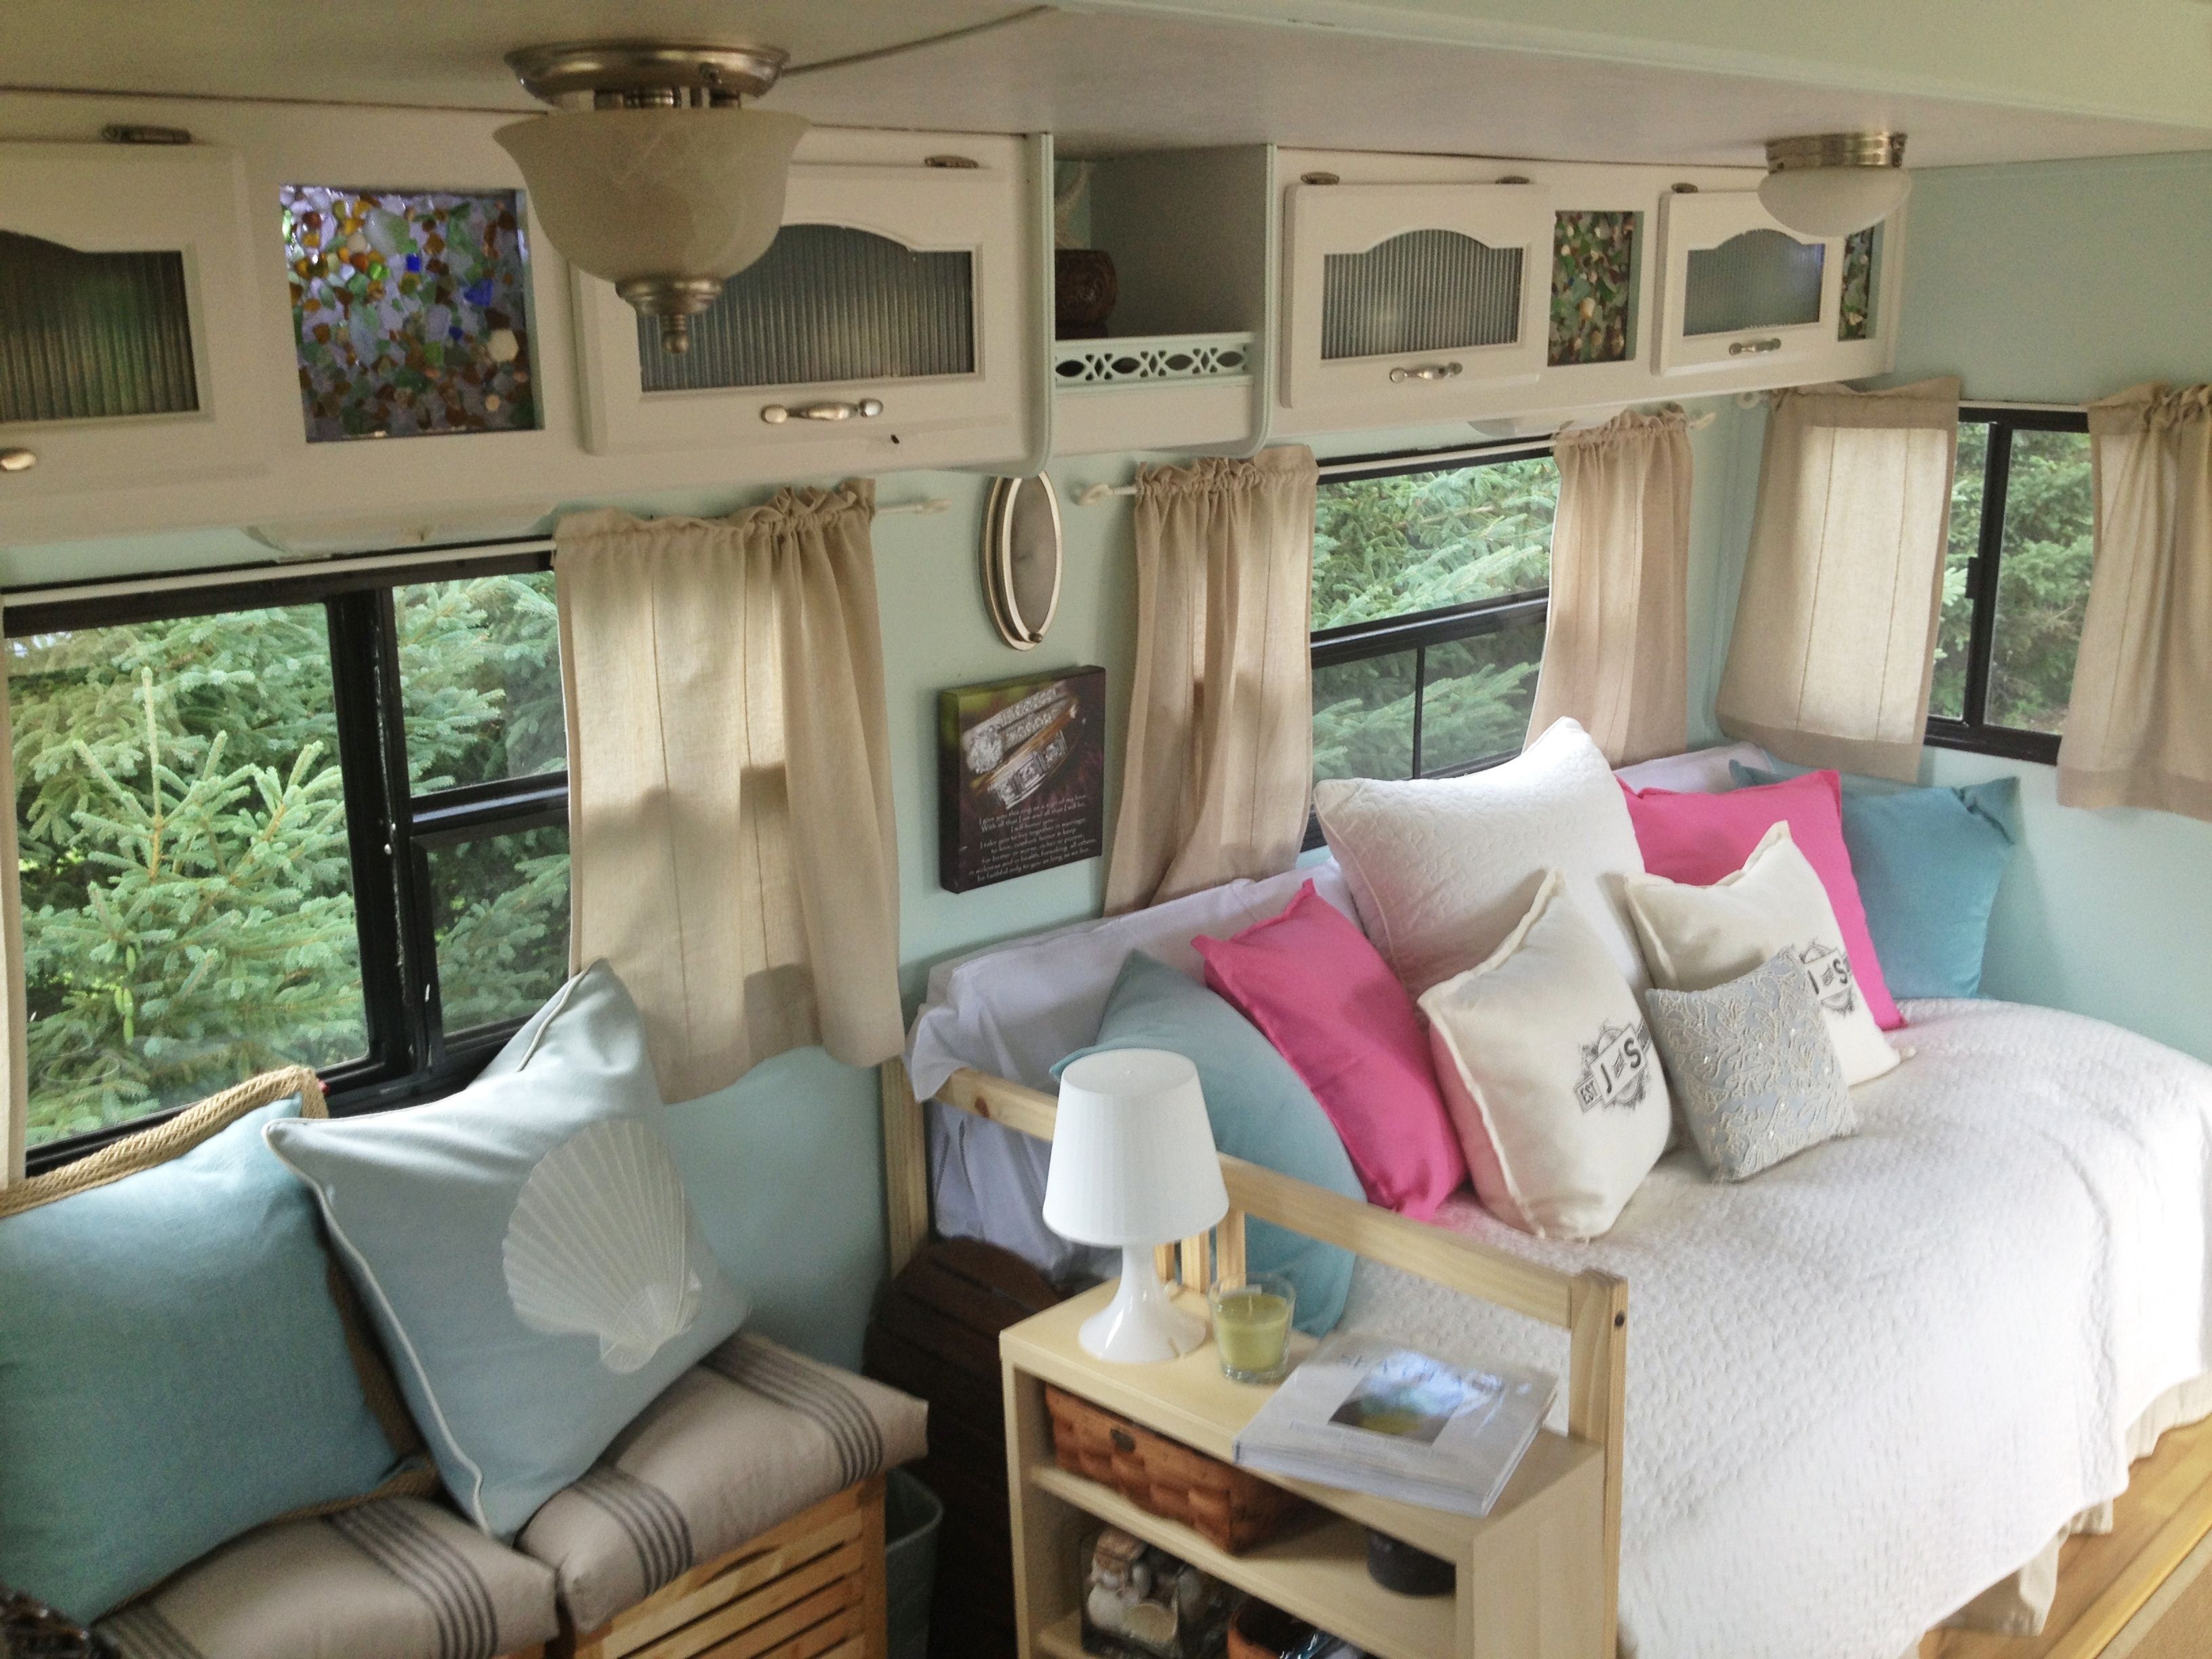 I absolutely love this remodel! My camper will look like this :)